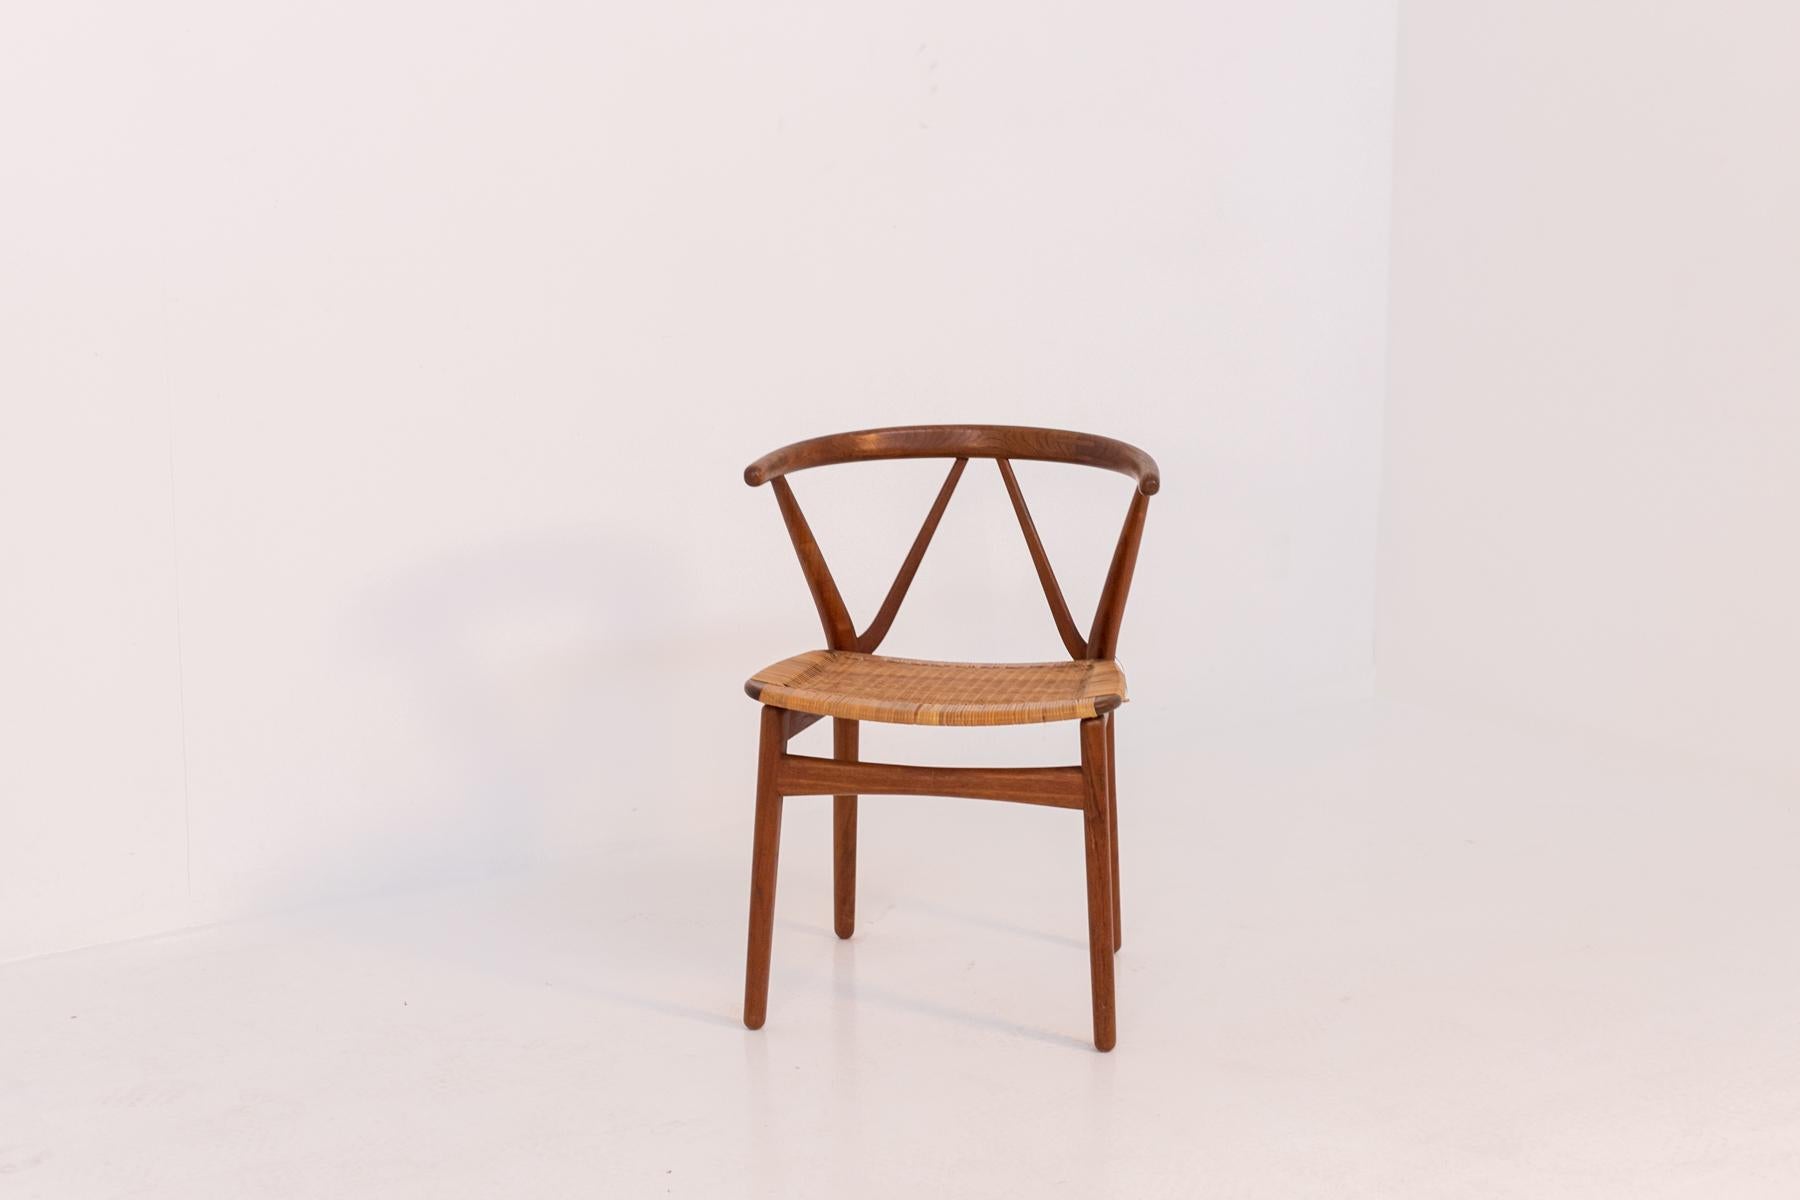 Elegant Danish wooden chair designed by Henning Kjærnulf for Bruno Hansen in the 1963.
The chair is composed of a strong and sturdy frame made of fine wood very elegant.
The backrest is very particular: it has a semicircular shape and the wooden